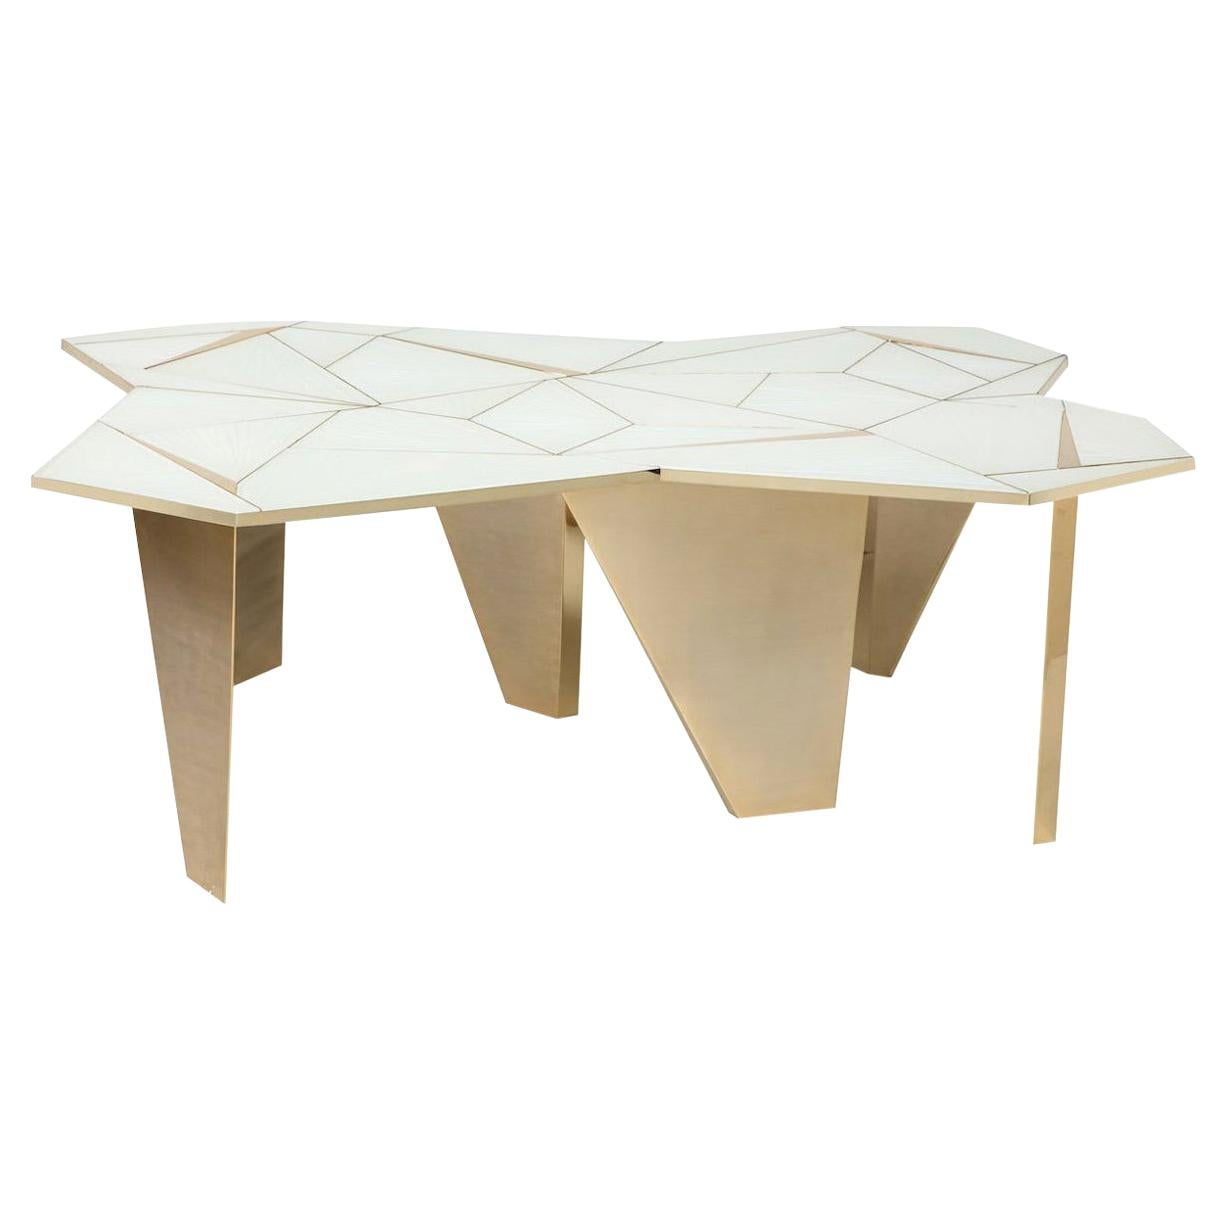 "Artide, " Limited Edition Low Table by Ghiró Studios